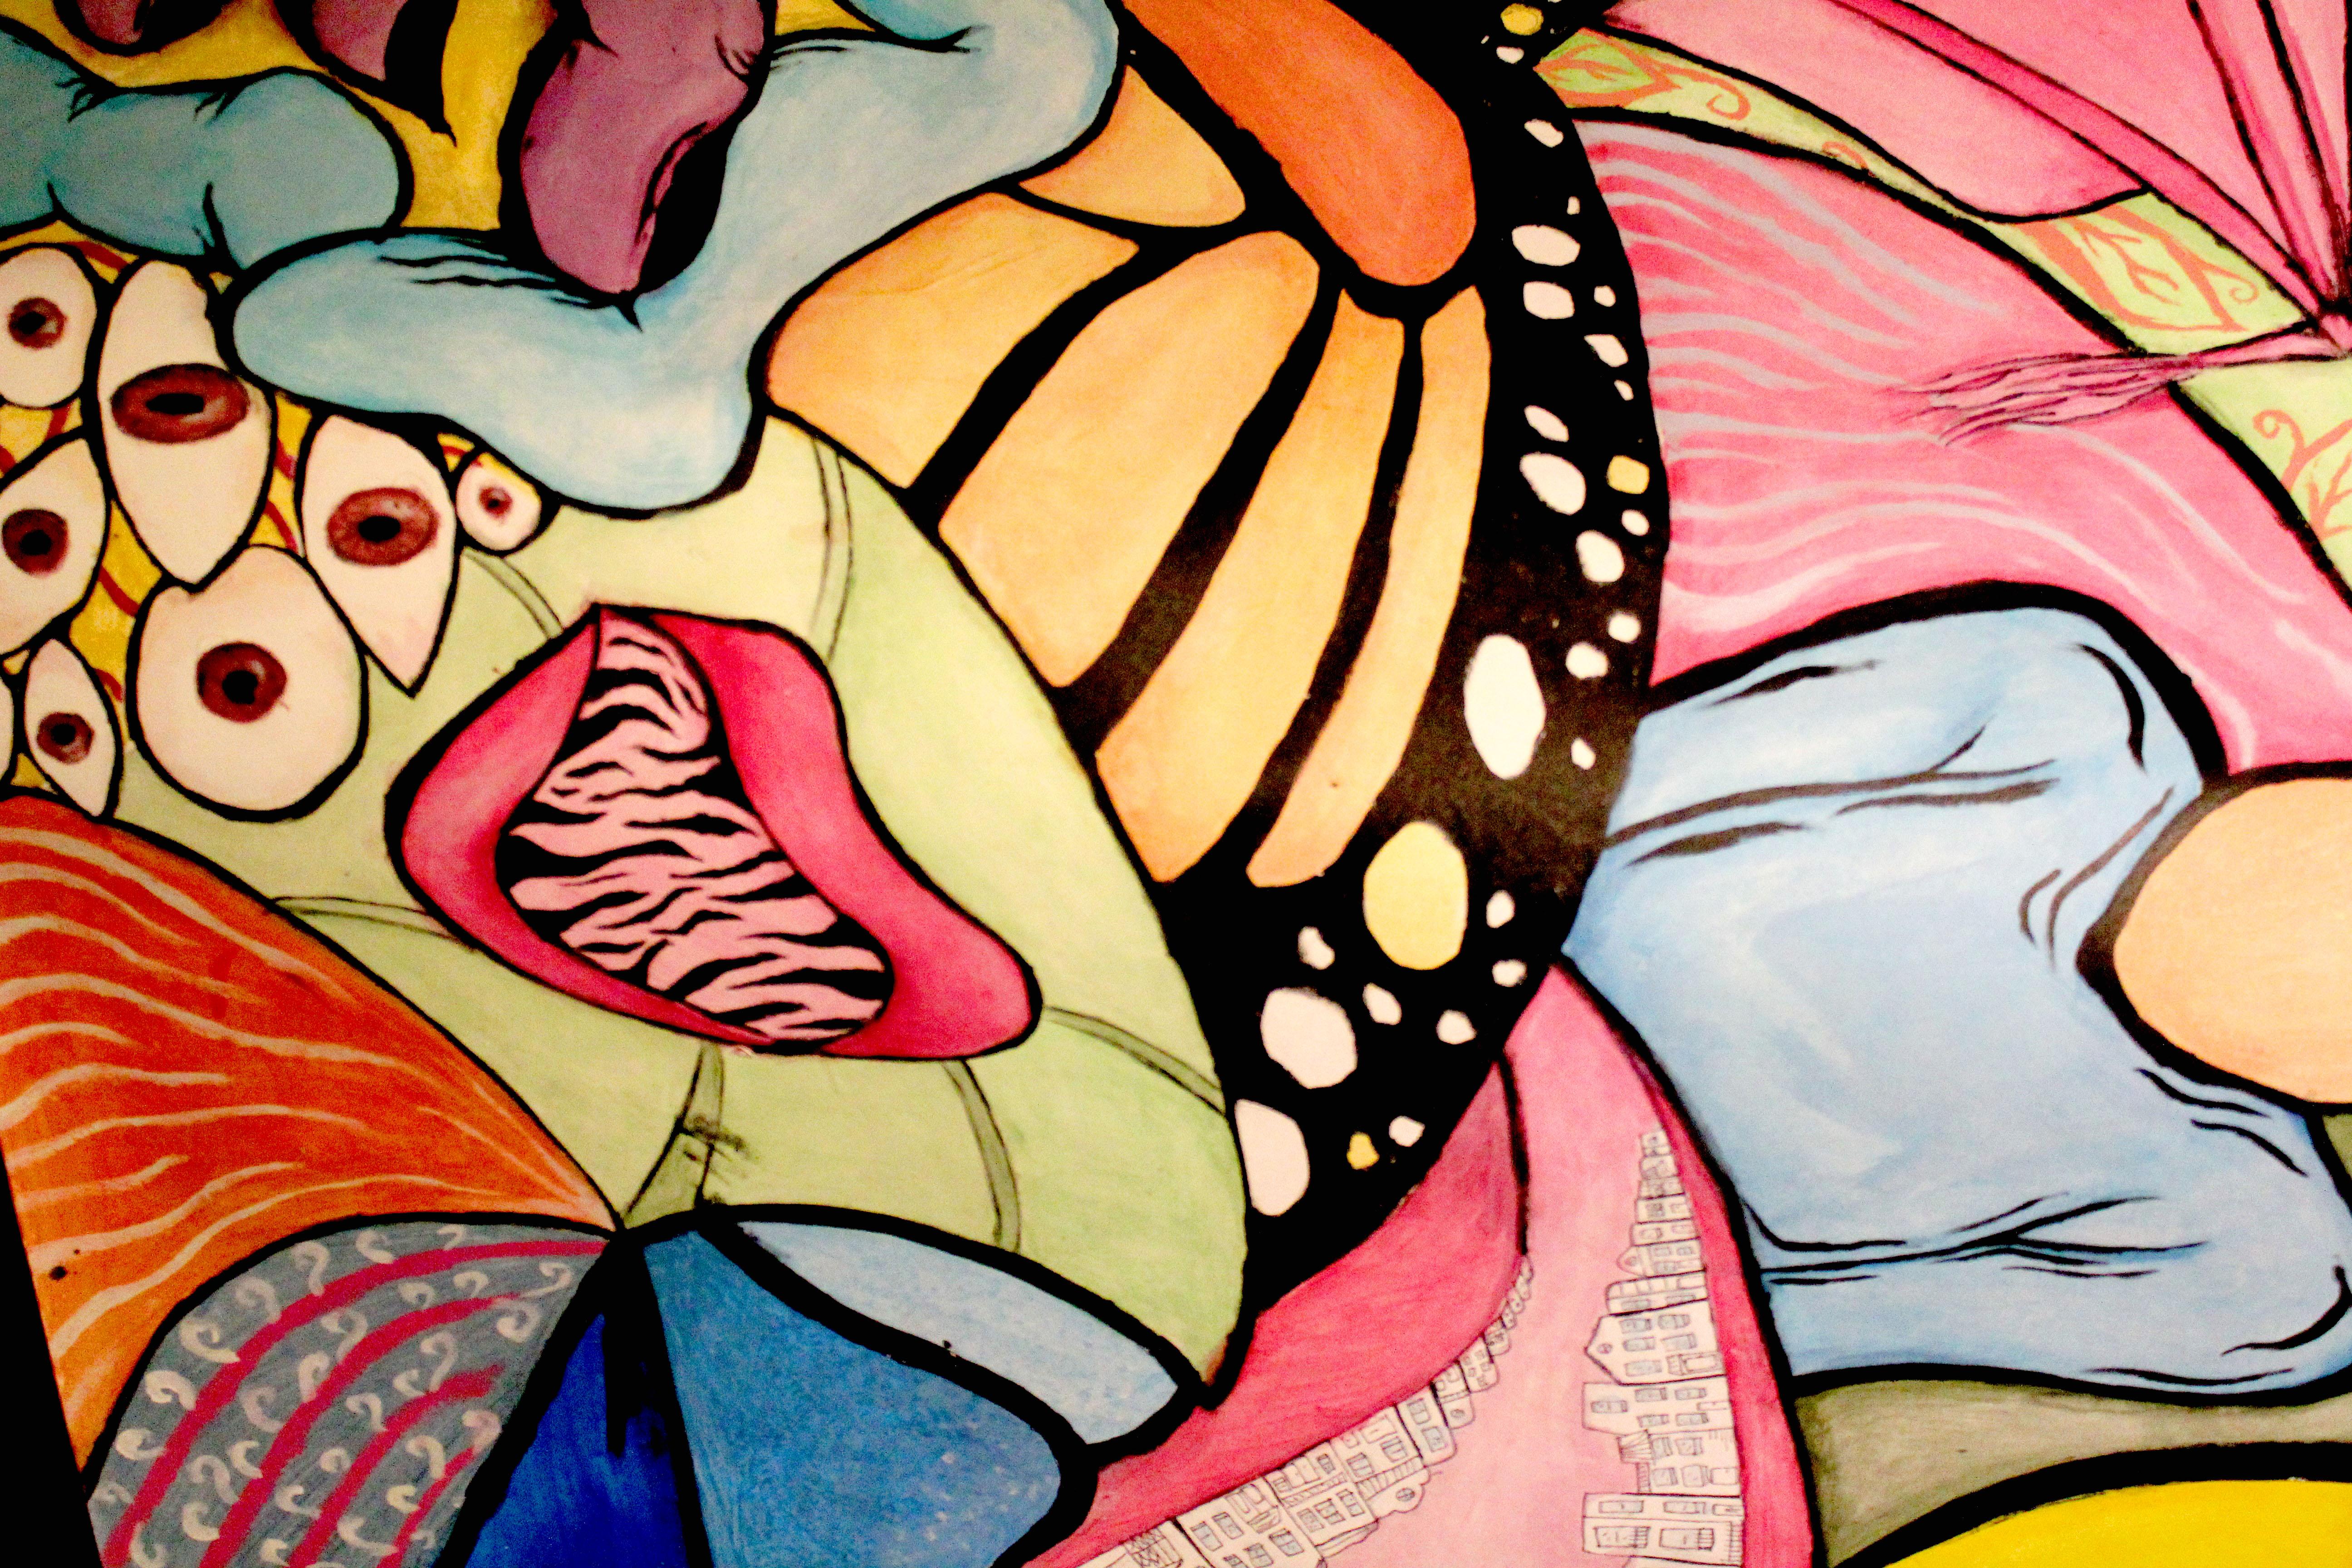 A brightly colored mural with overlapping abstract and partially figurative images, such as eyeballs and a butterfly wing.